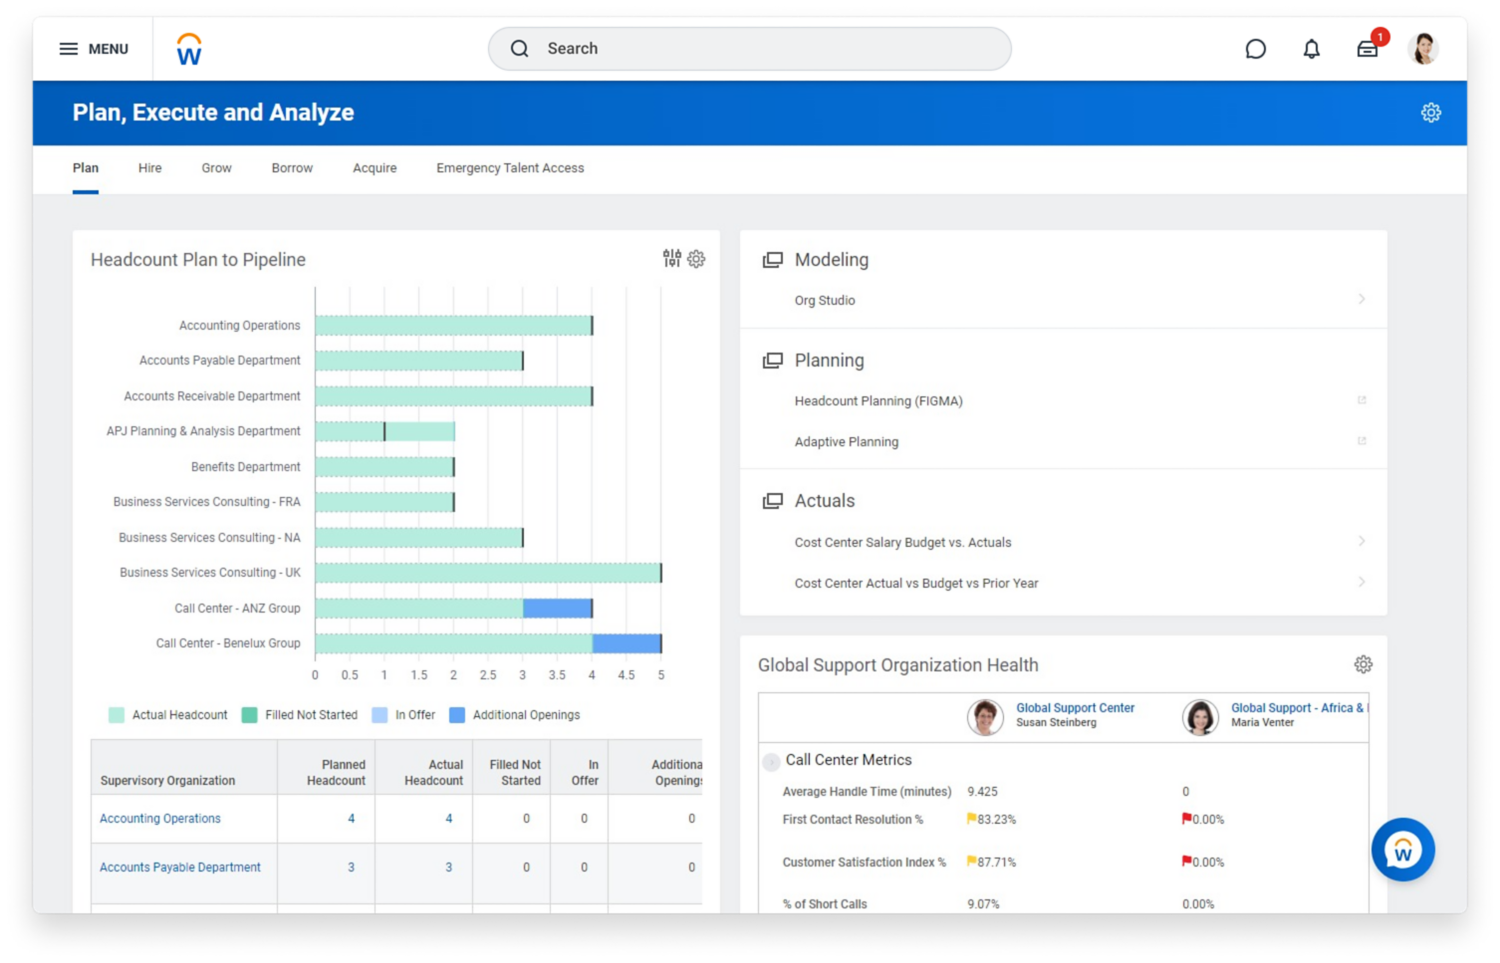 Workday Adaptive Planning's Continuous Talent Planning dashboard gap analysis. 